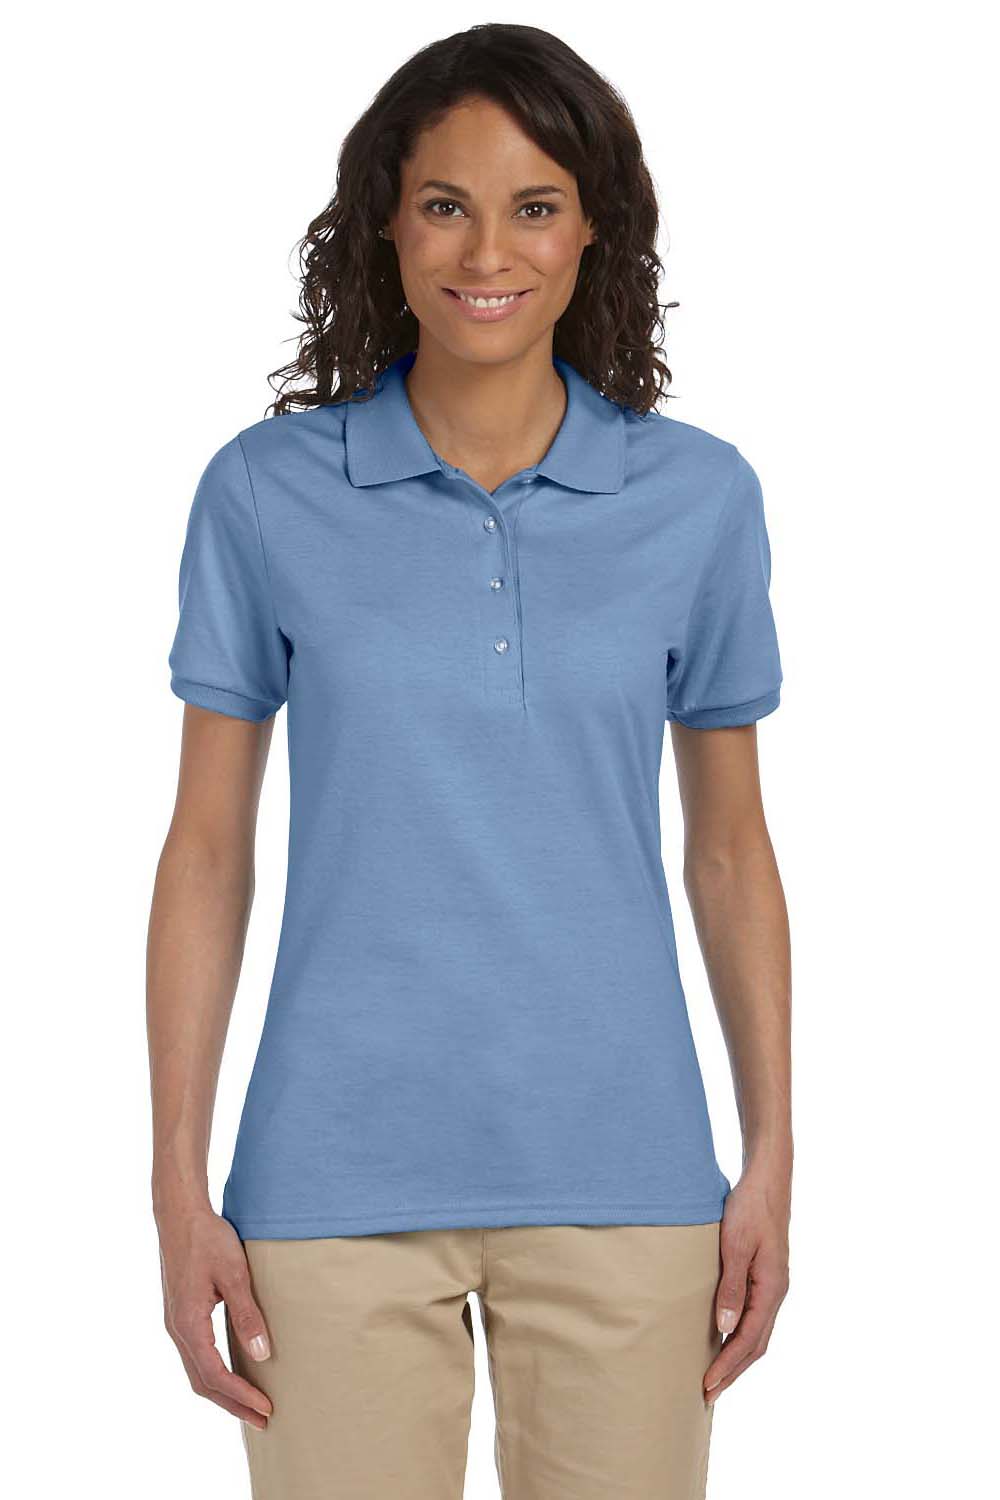 Jerzees 437W Womens SpotShield Stain Resistant Short Sleeve Polo Shirt Light Blue Front